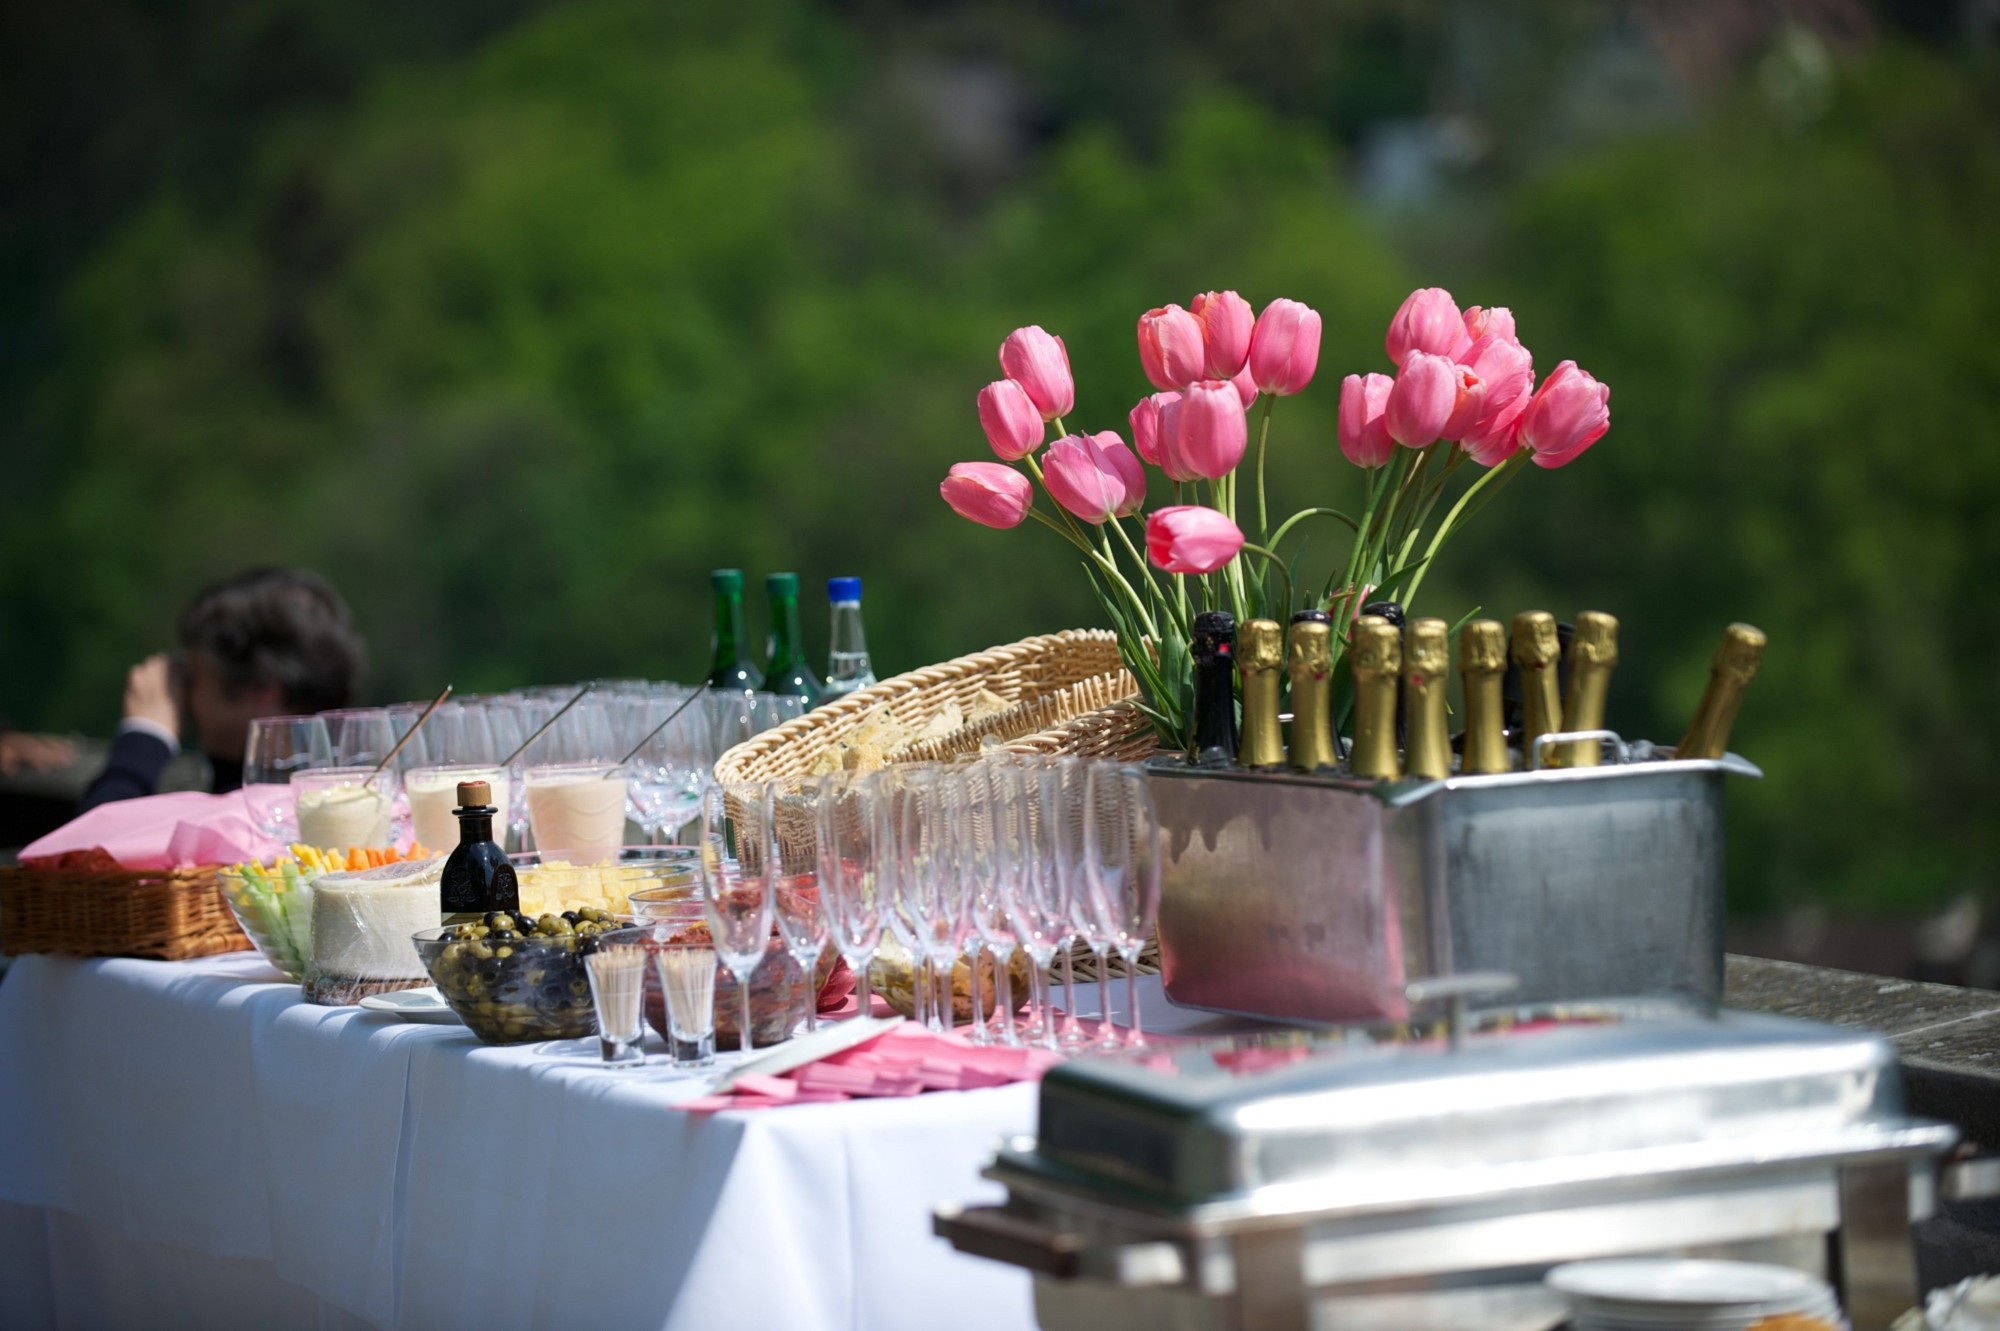 Outdoor Entertaining: 7 Secret Tips for an Off-The-Wall Party